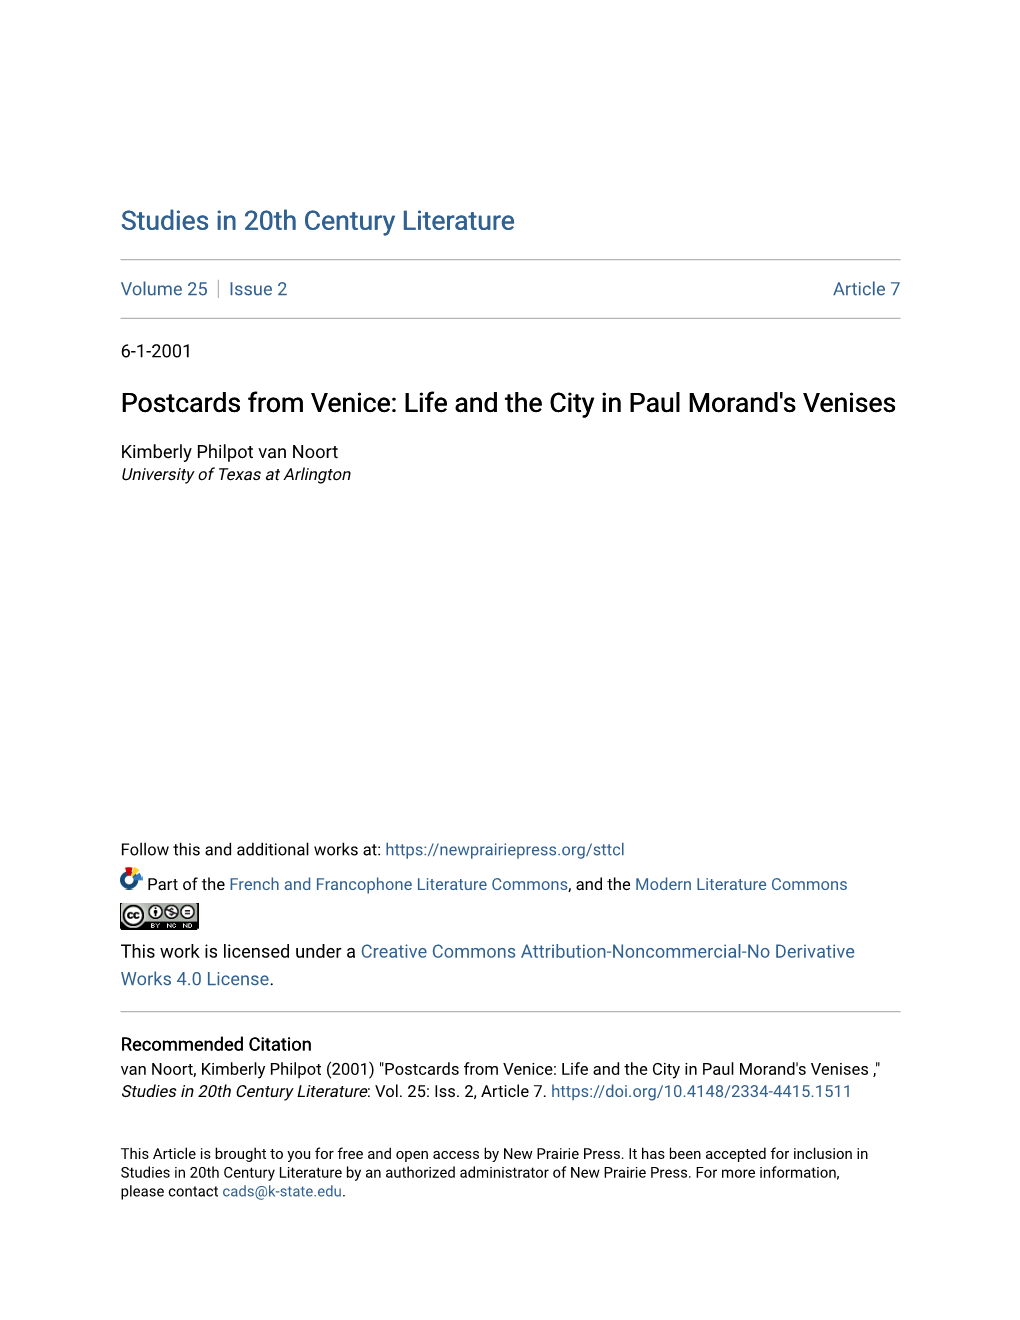 Life and the City in Paul Morand's Venises